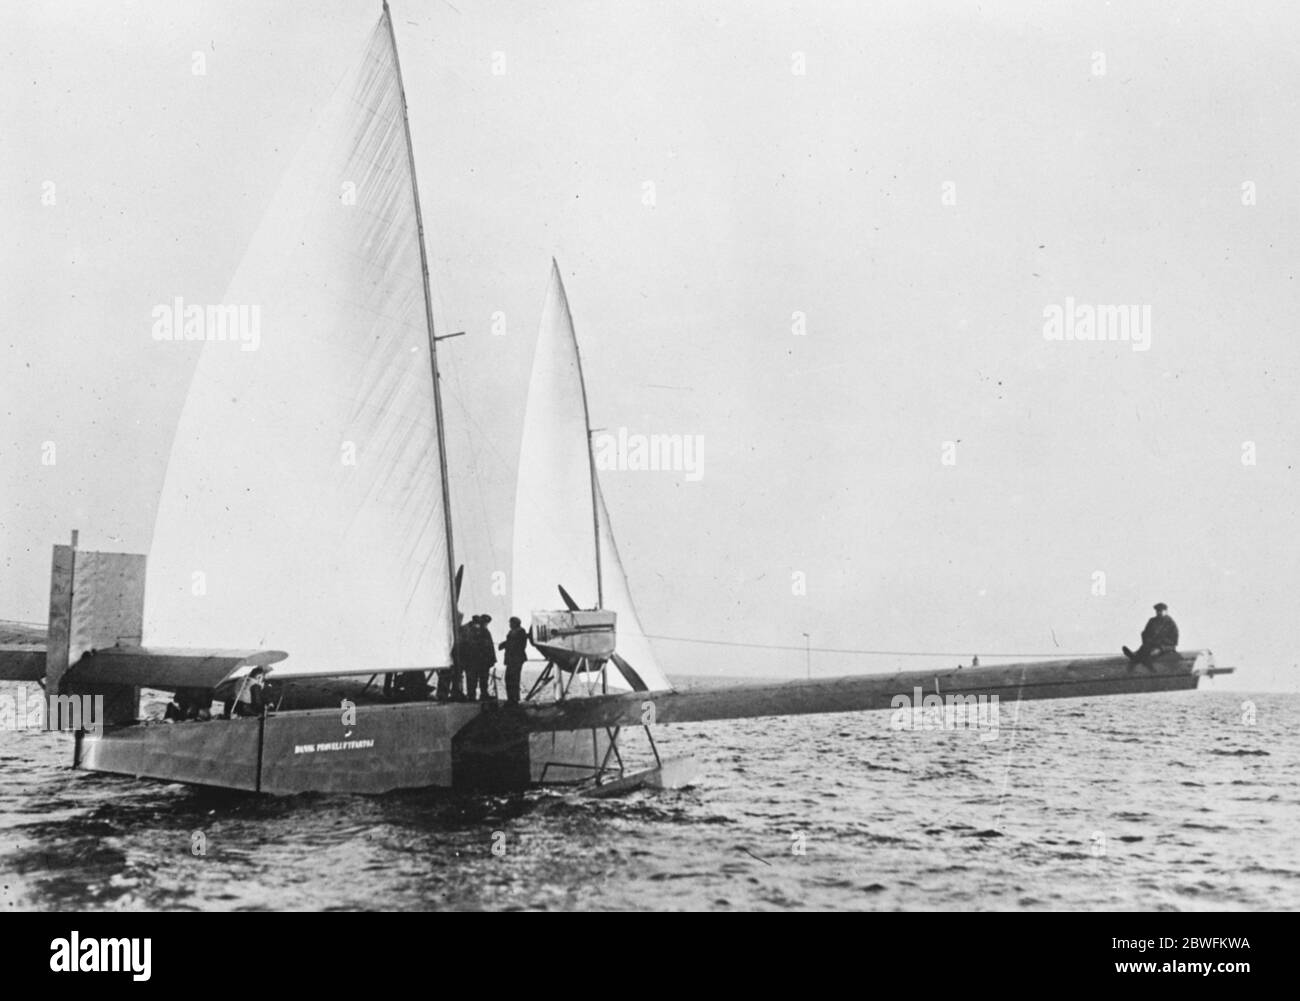 New flying boat with sails The beardmore-Rohrbach flying boat , represents an interesting development in all-metal construction . This is said to be the first time a machine of this type has been fitted with collapsible masts and sails . The craft seen here with sails extended 6 April 1925 Stock Photo